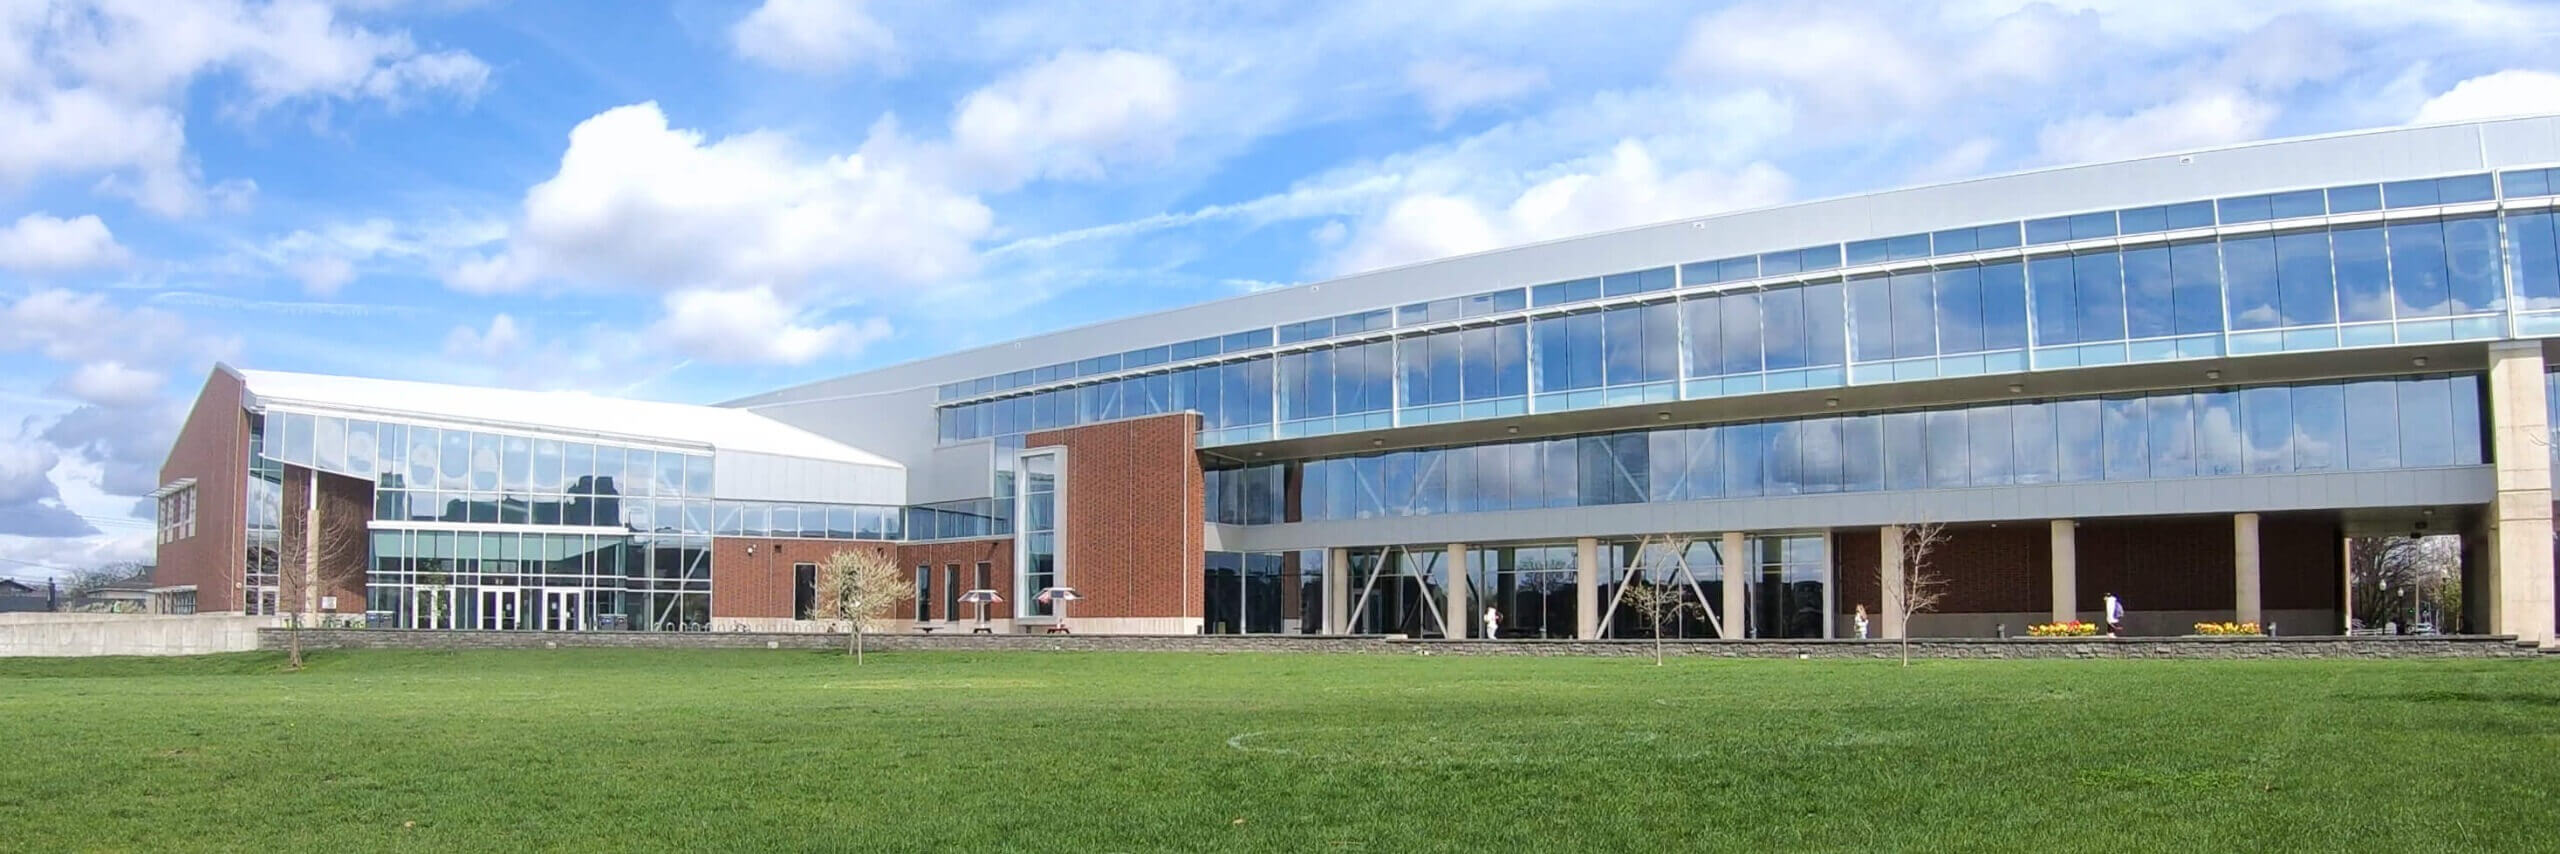 The Student Fitness Center